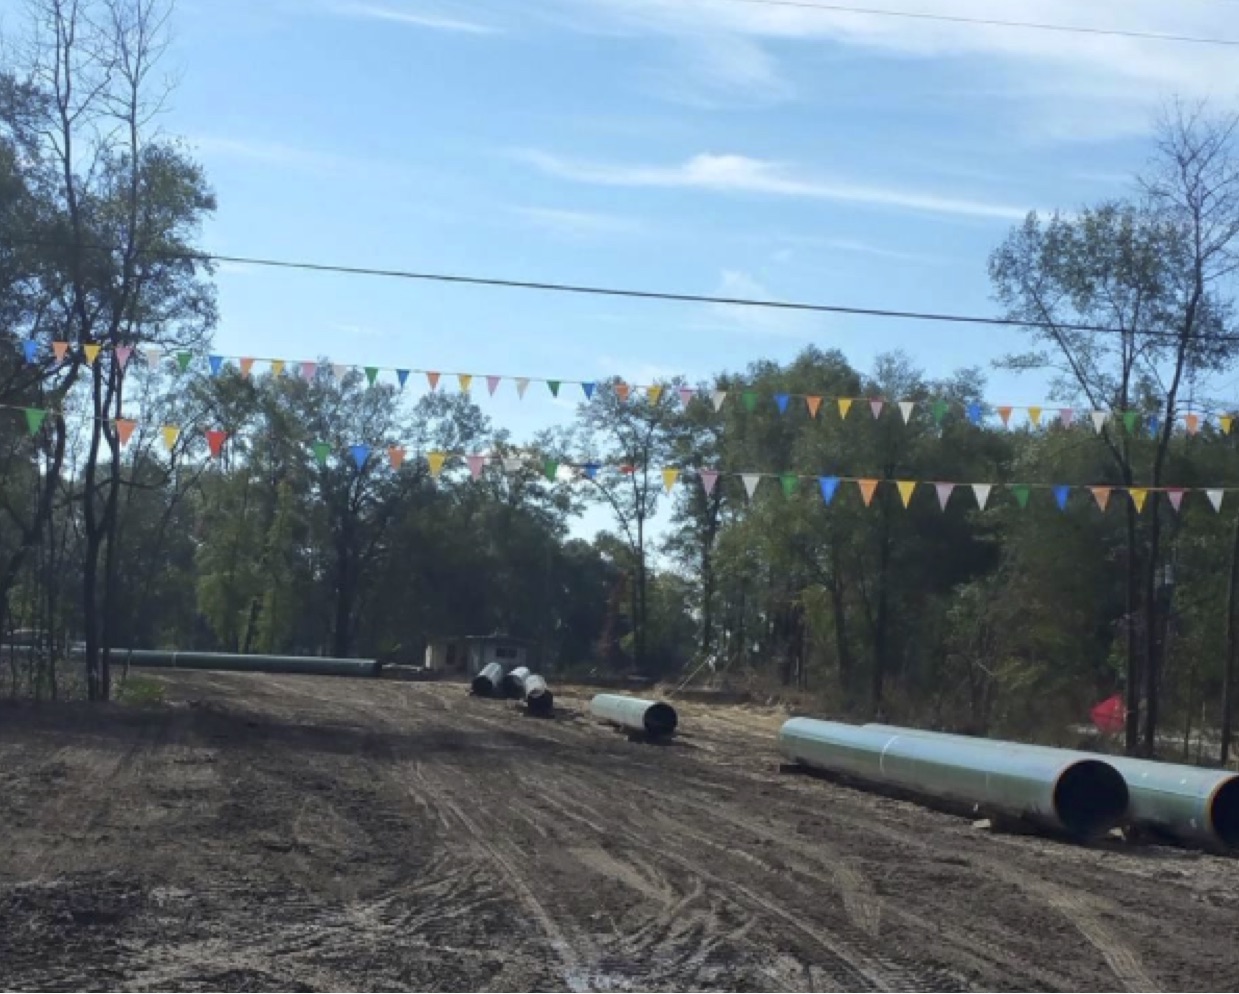 New sections of pipe being laid as part of the Sabal Trail pipeline.